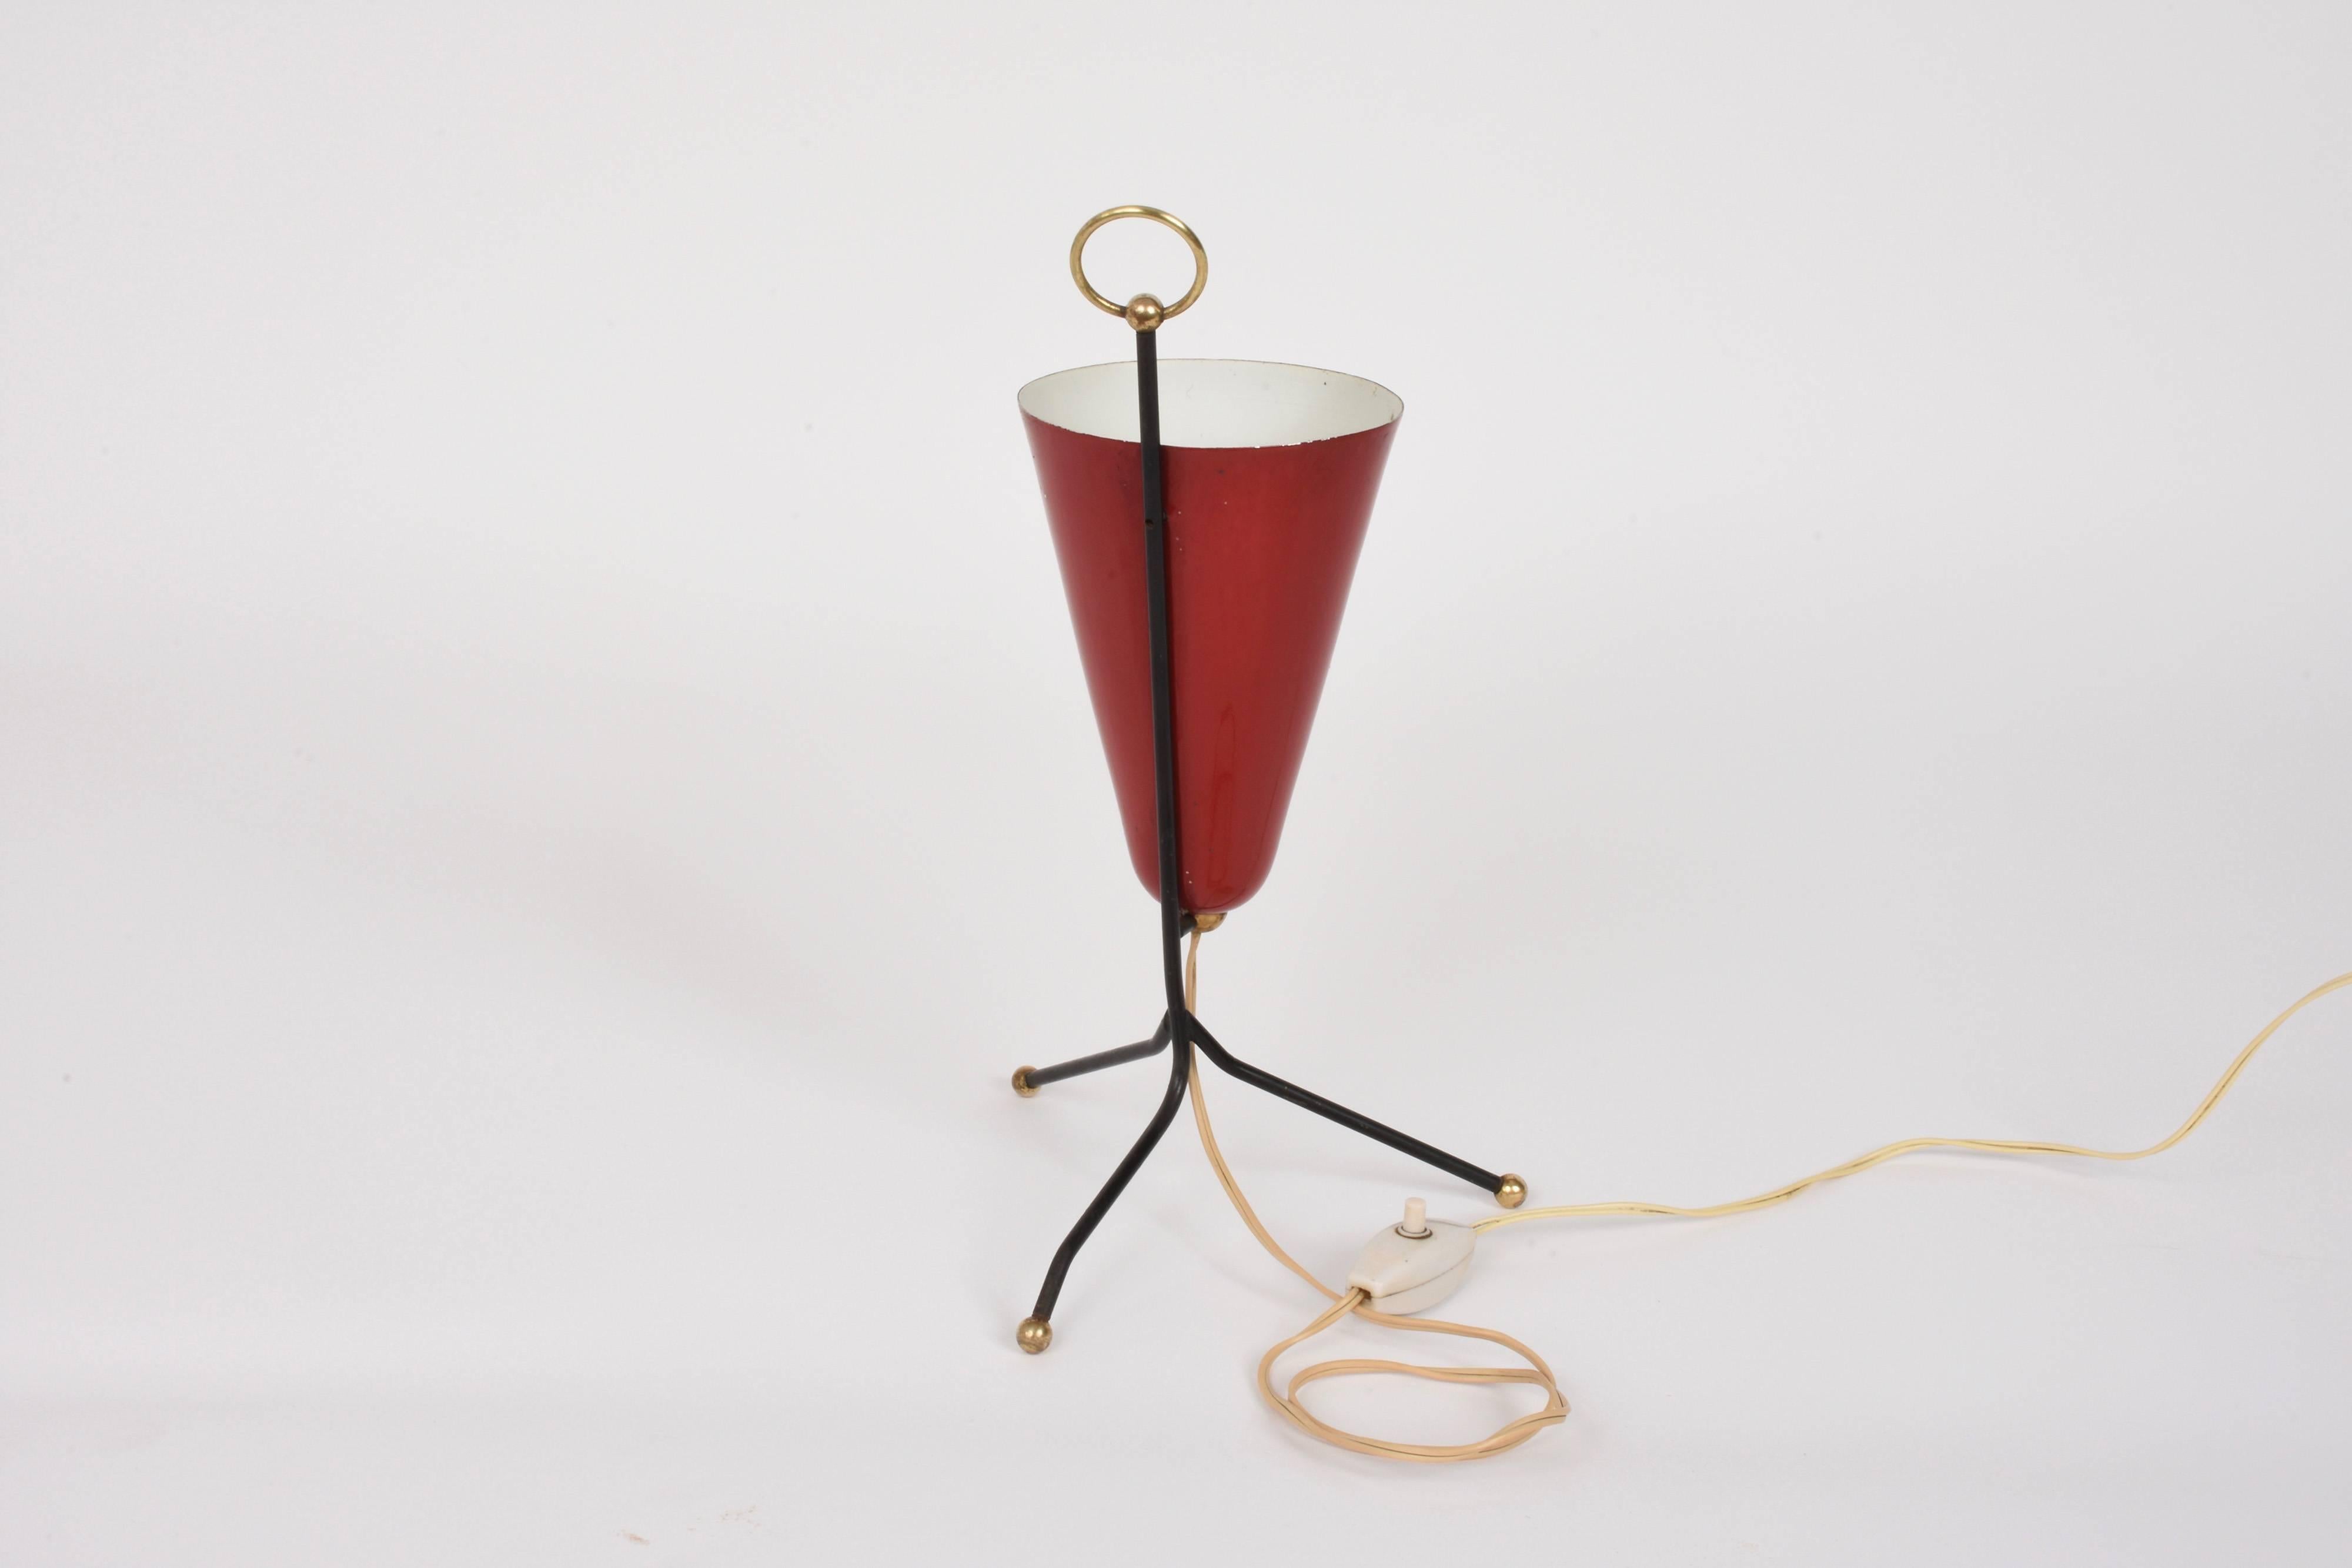 20th Century Red Lacquered Metal and Brass Conical Italian Table Lamp with Tripod, 1950s For Sale